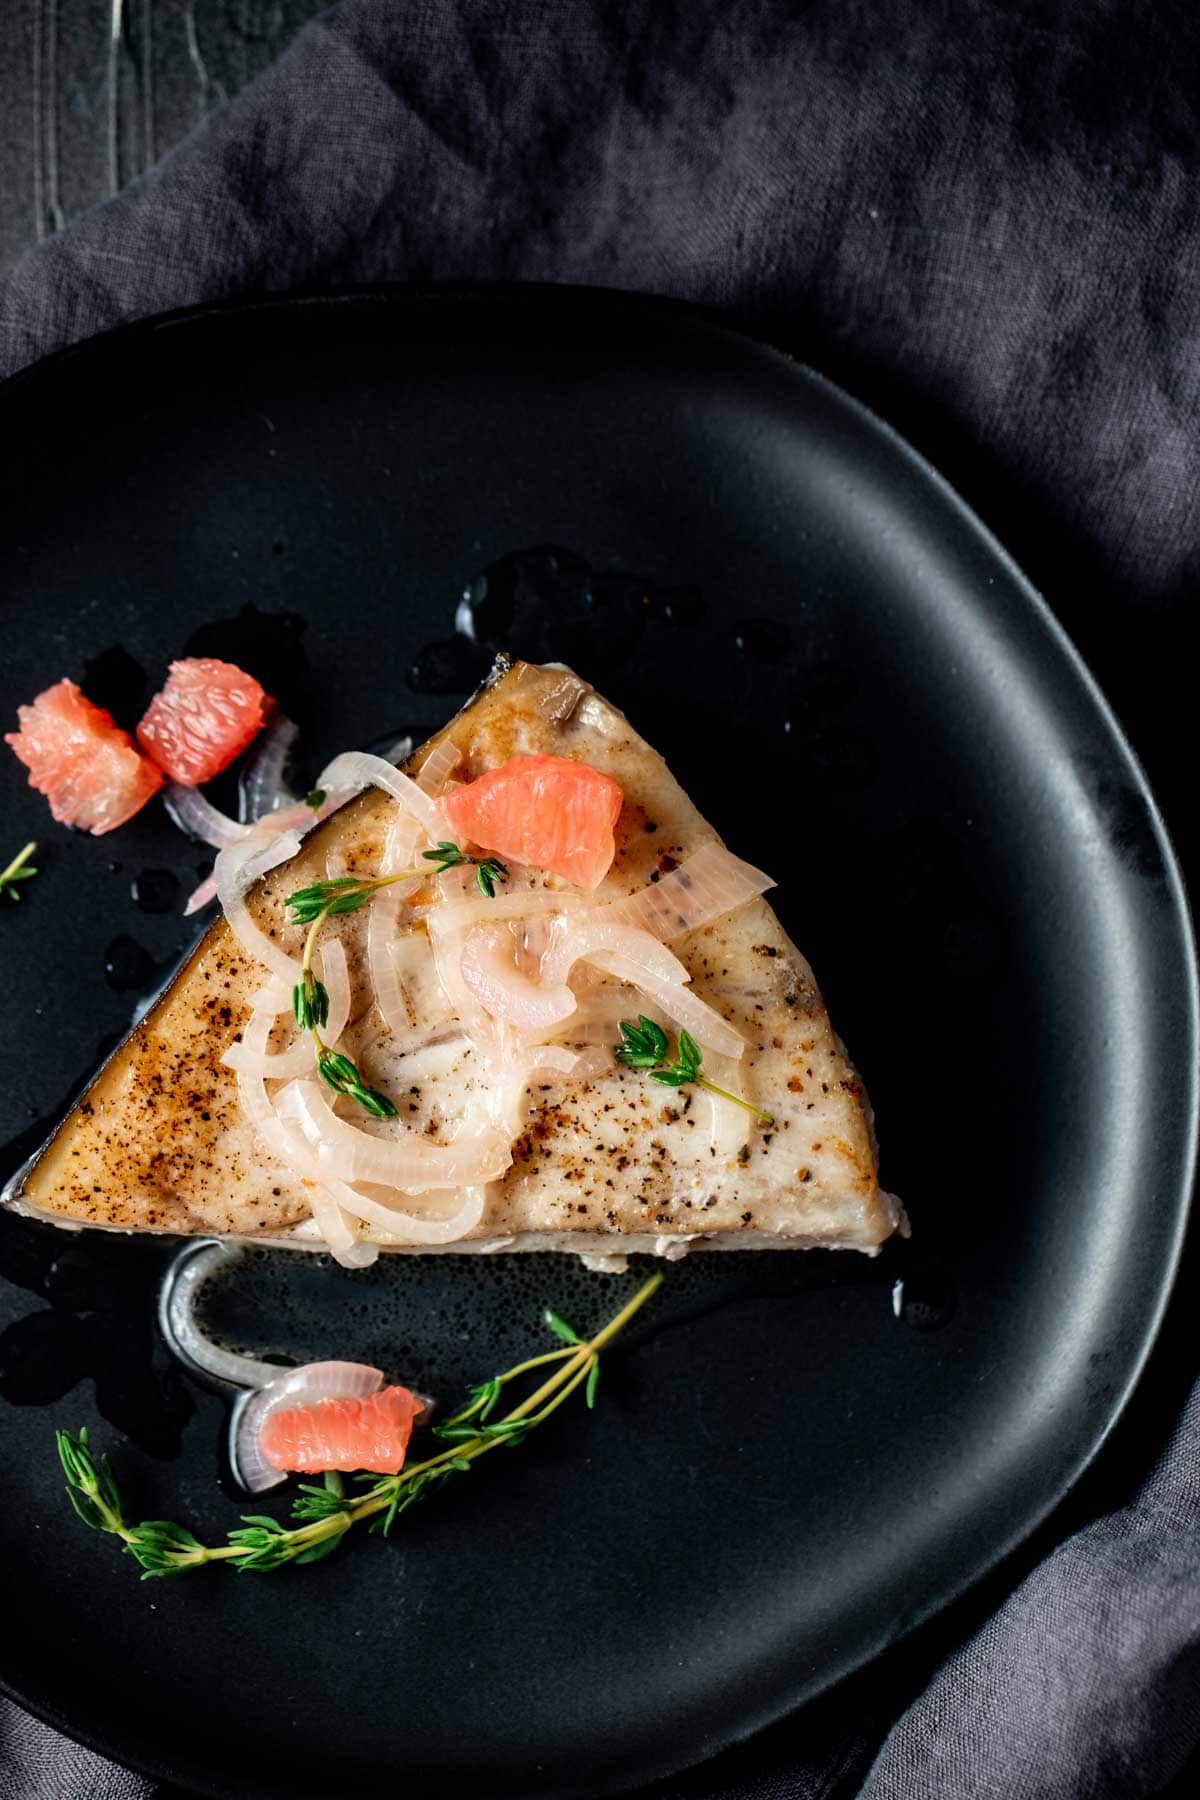 Overhead view of a swordfish steak on a black plate with shallots and grapefruit pieces on top.